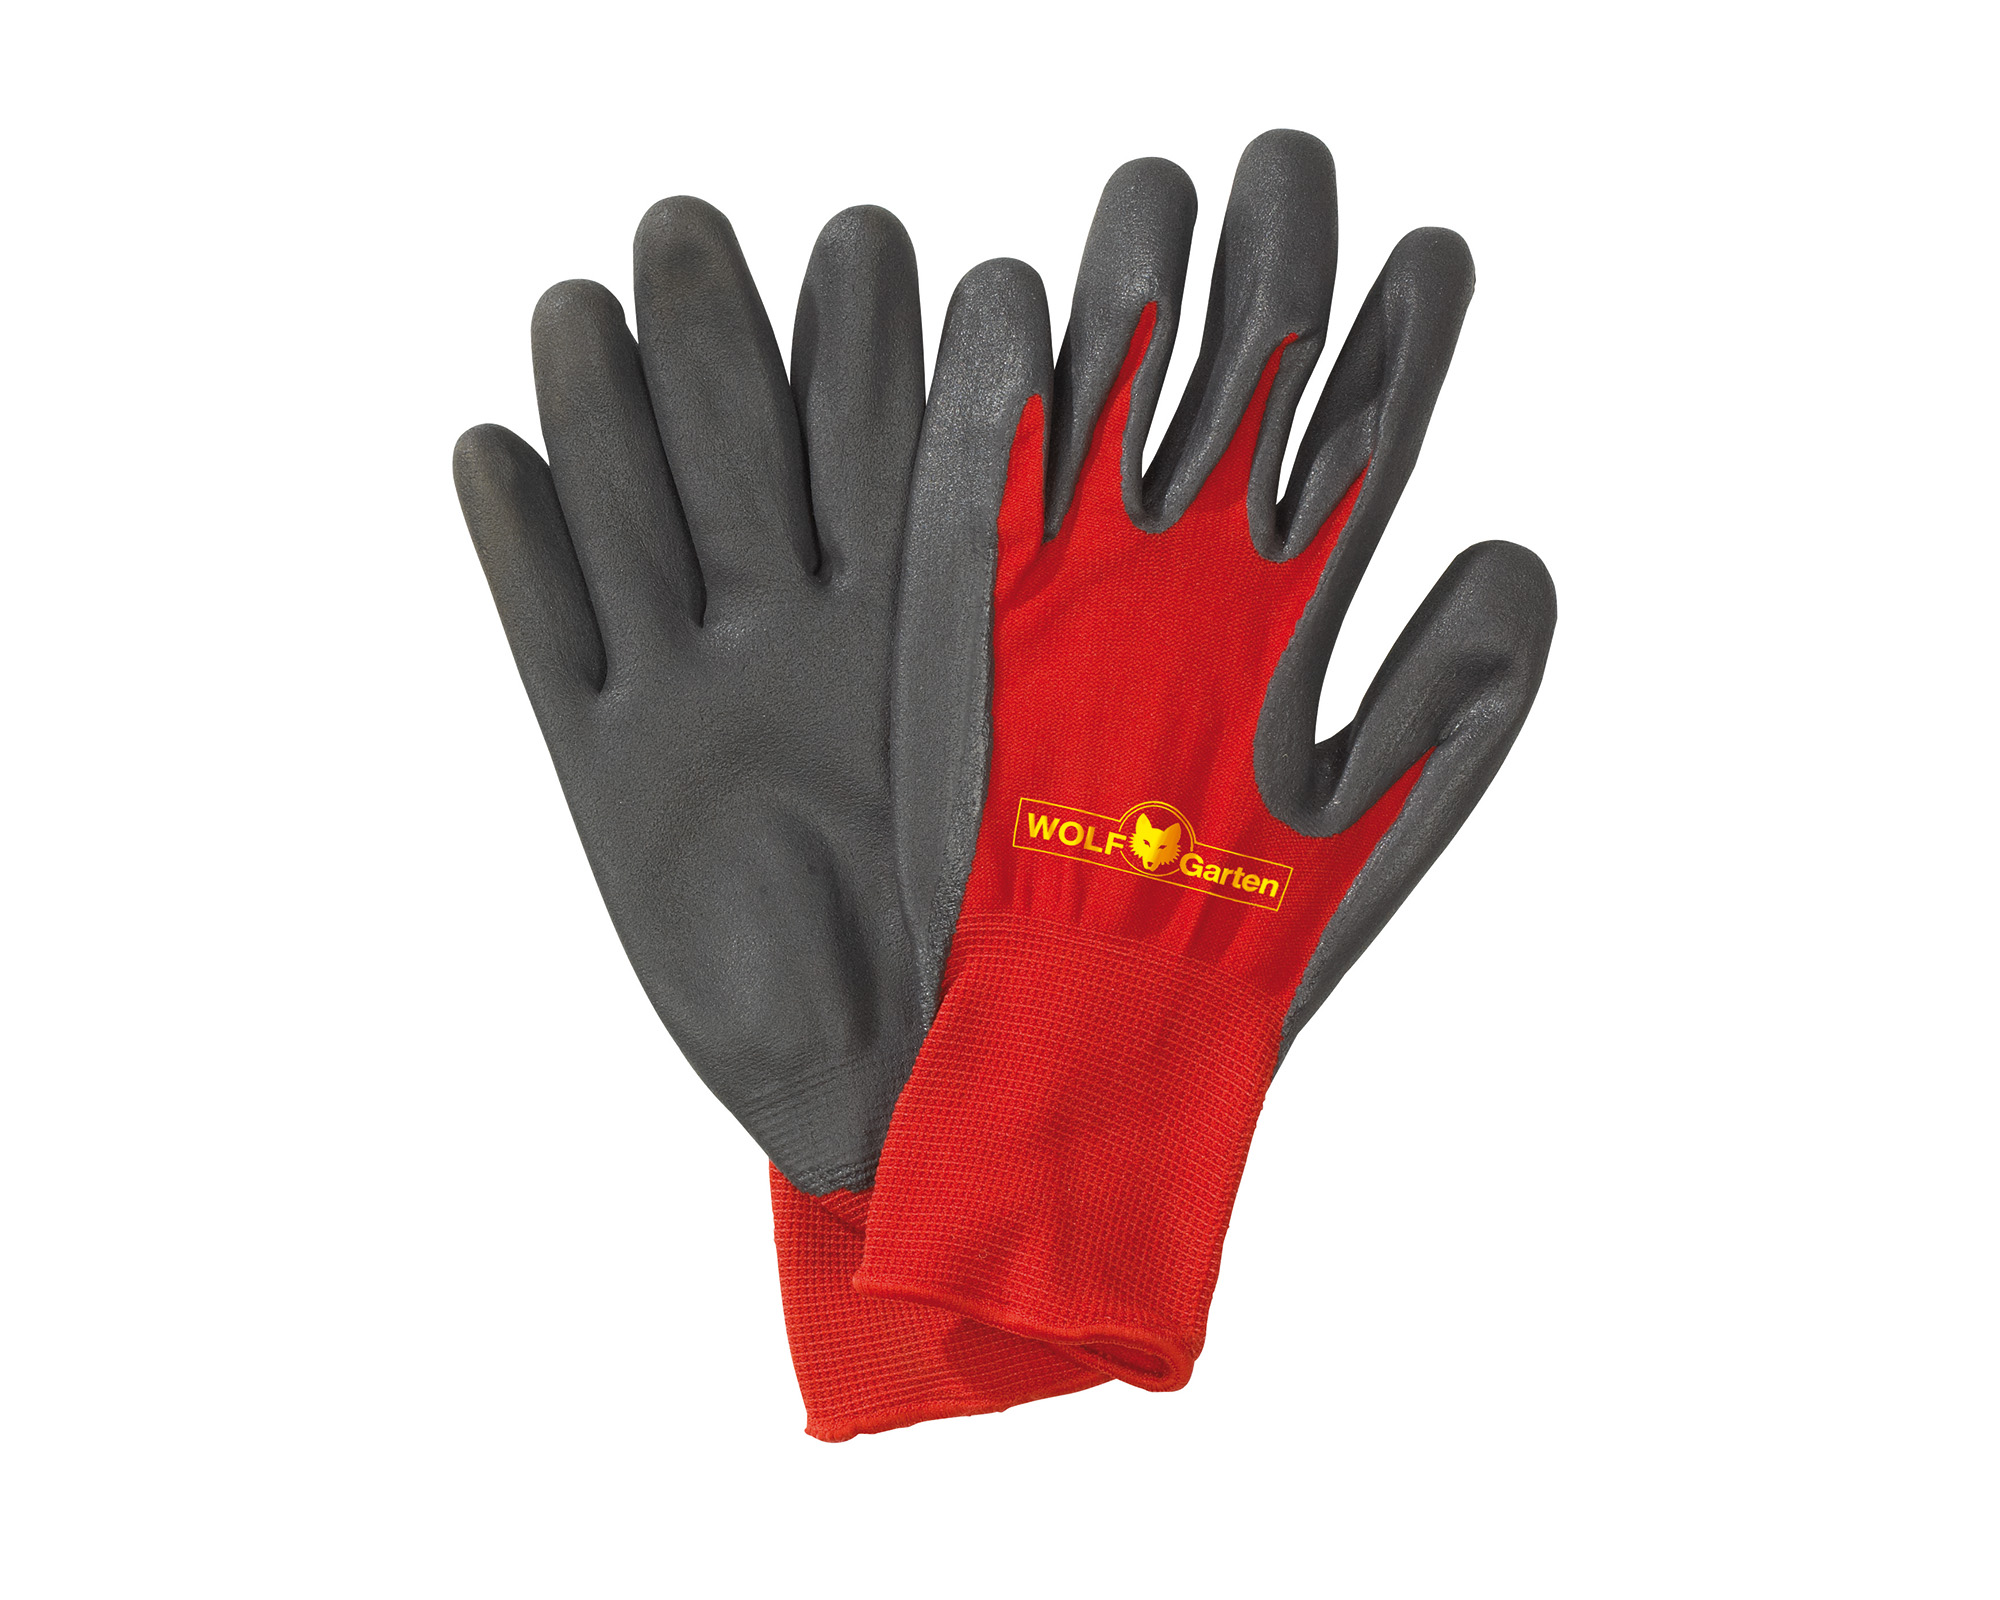 Wolf - Washable Soil Care Gloves - available in 3 sizes